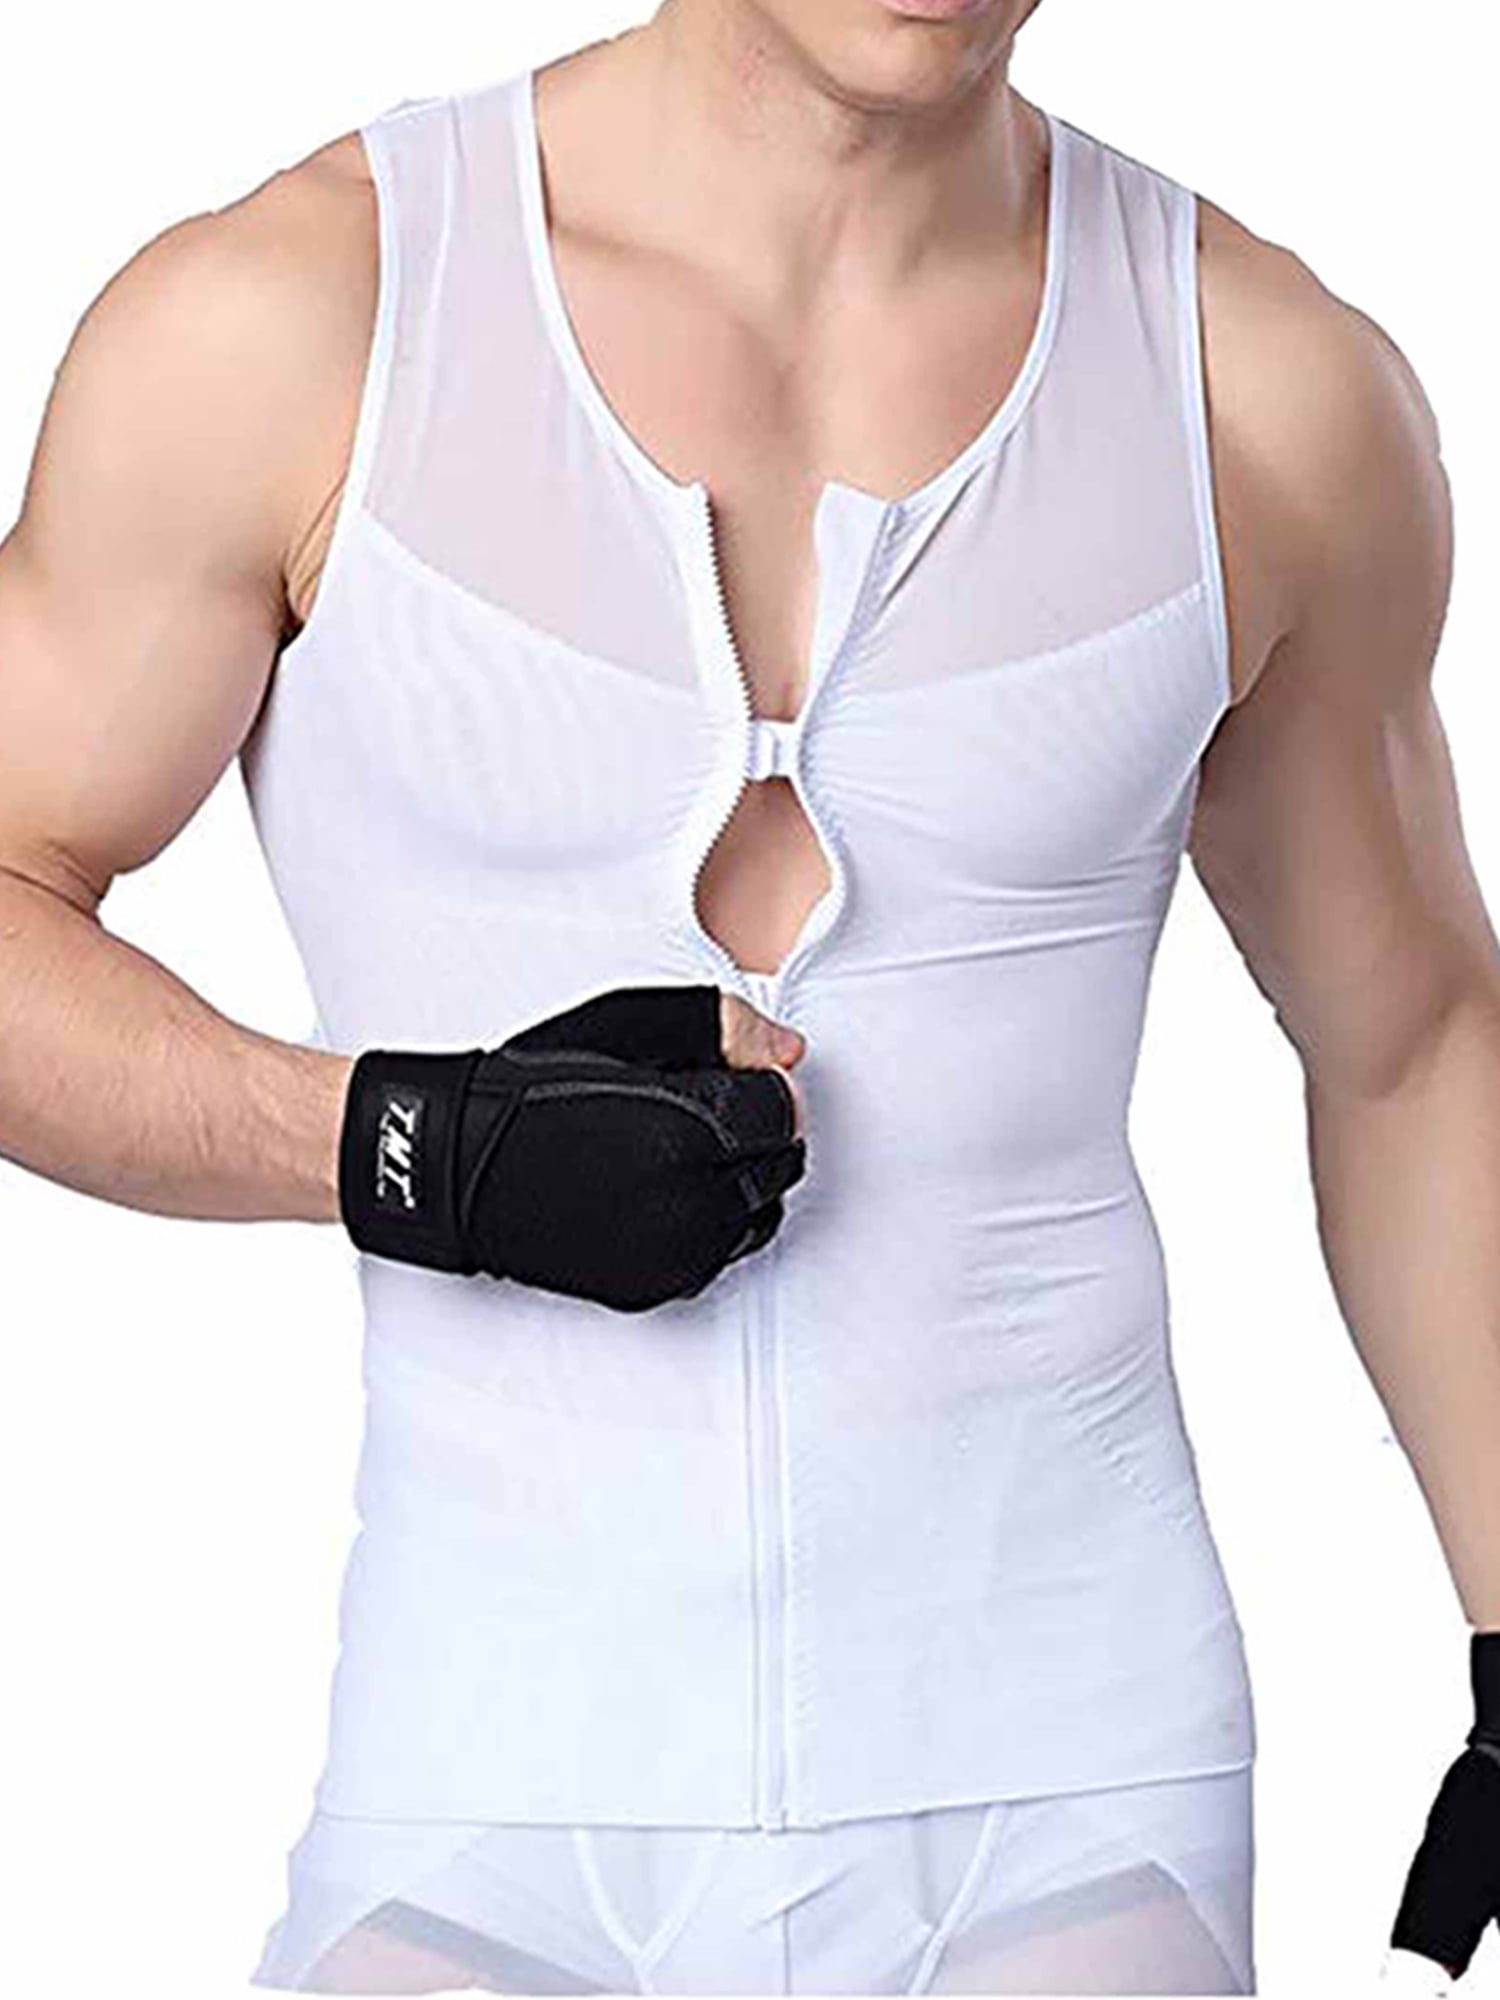 Mens Slimming Body Shaper Chest Compression Undershirt Abs Tank Top Shapewear Vest with Zipper White 